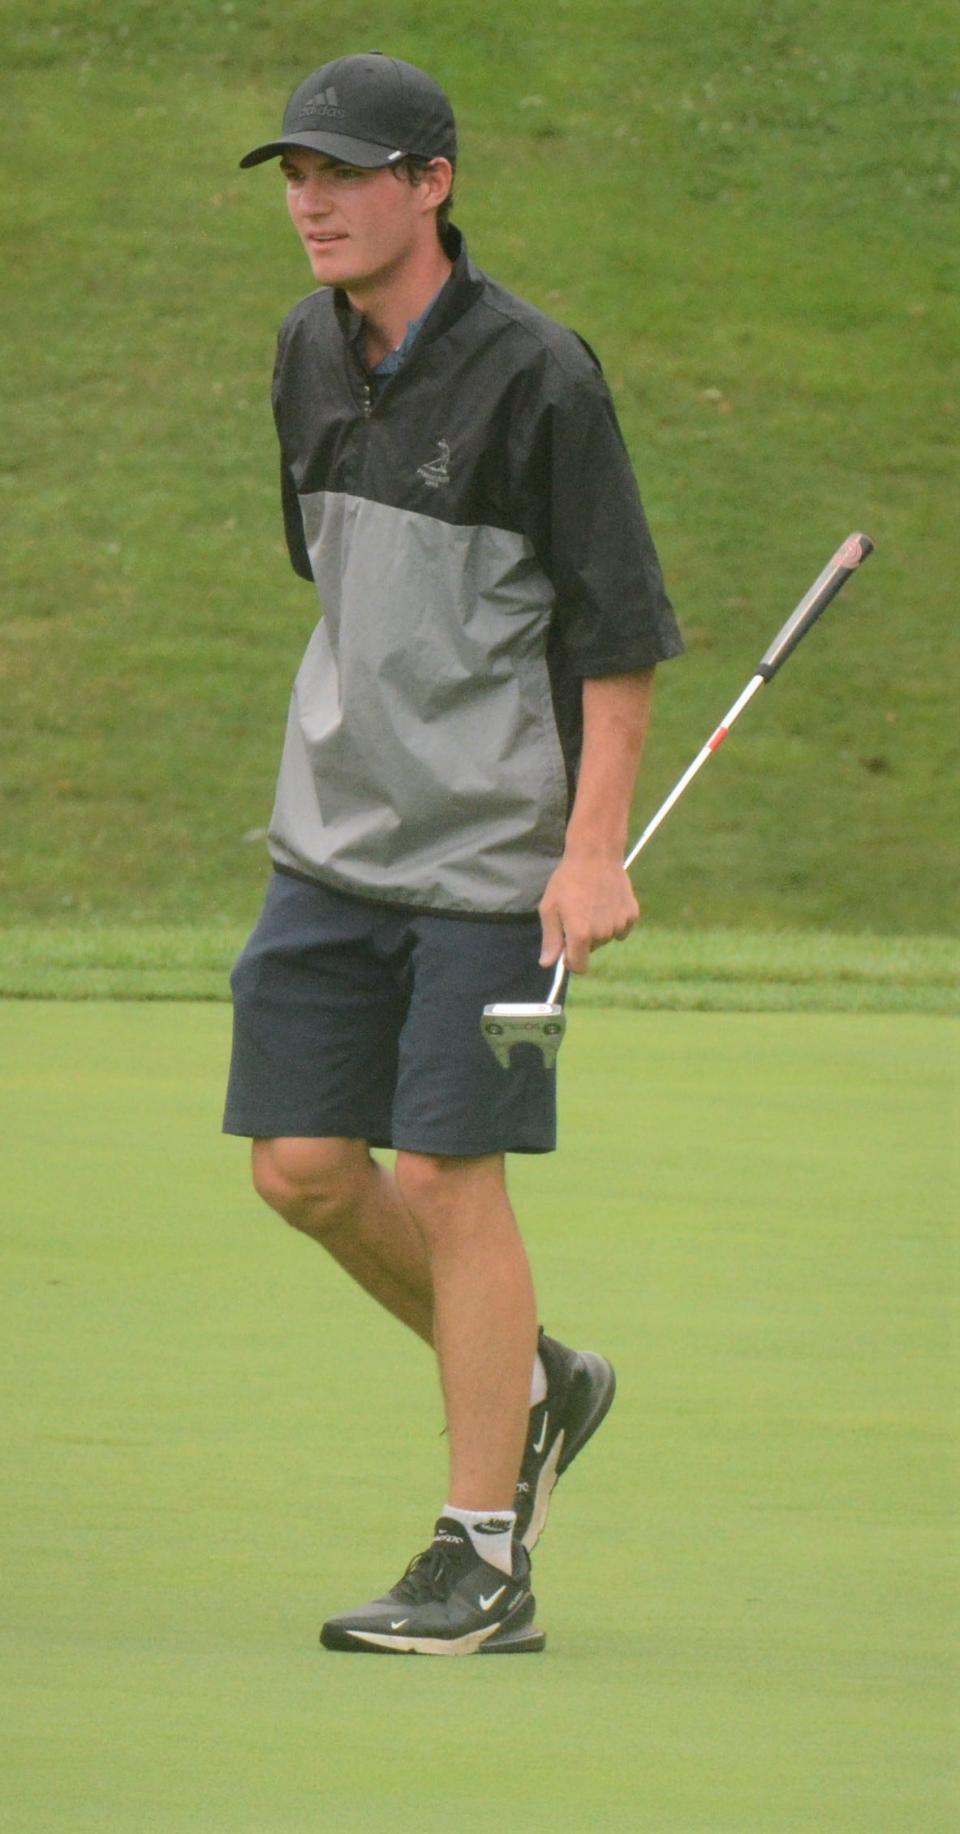 Holden Sullivan, a recent RHAM graduate who won the CIAC State Open last June, will play for the Norwich Invitational championship on Aug. 19.